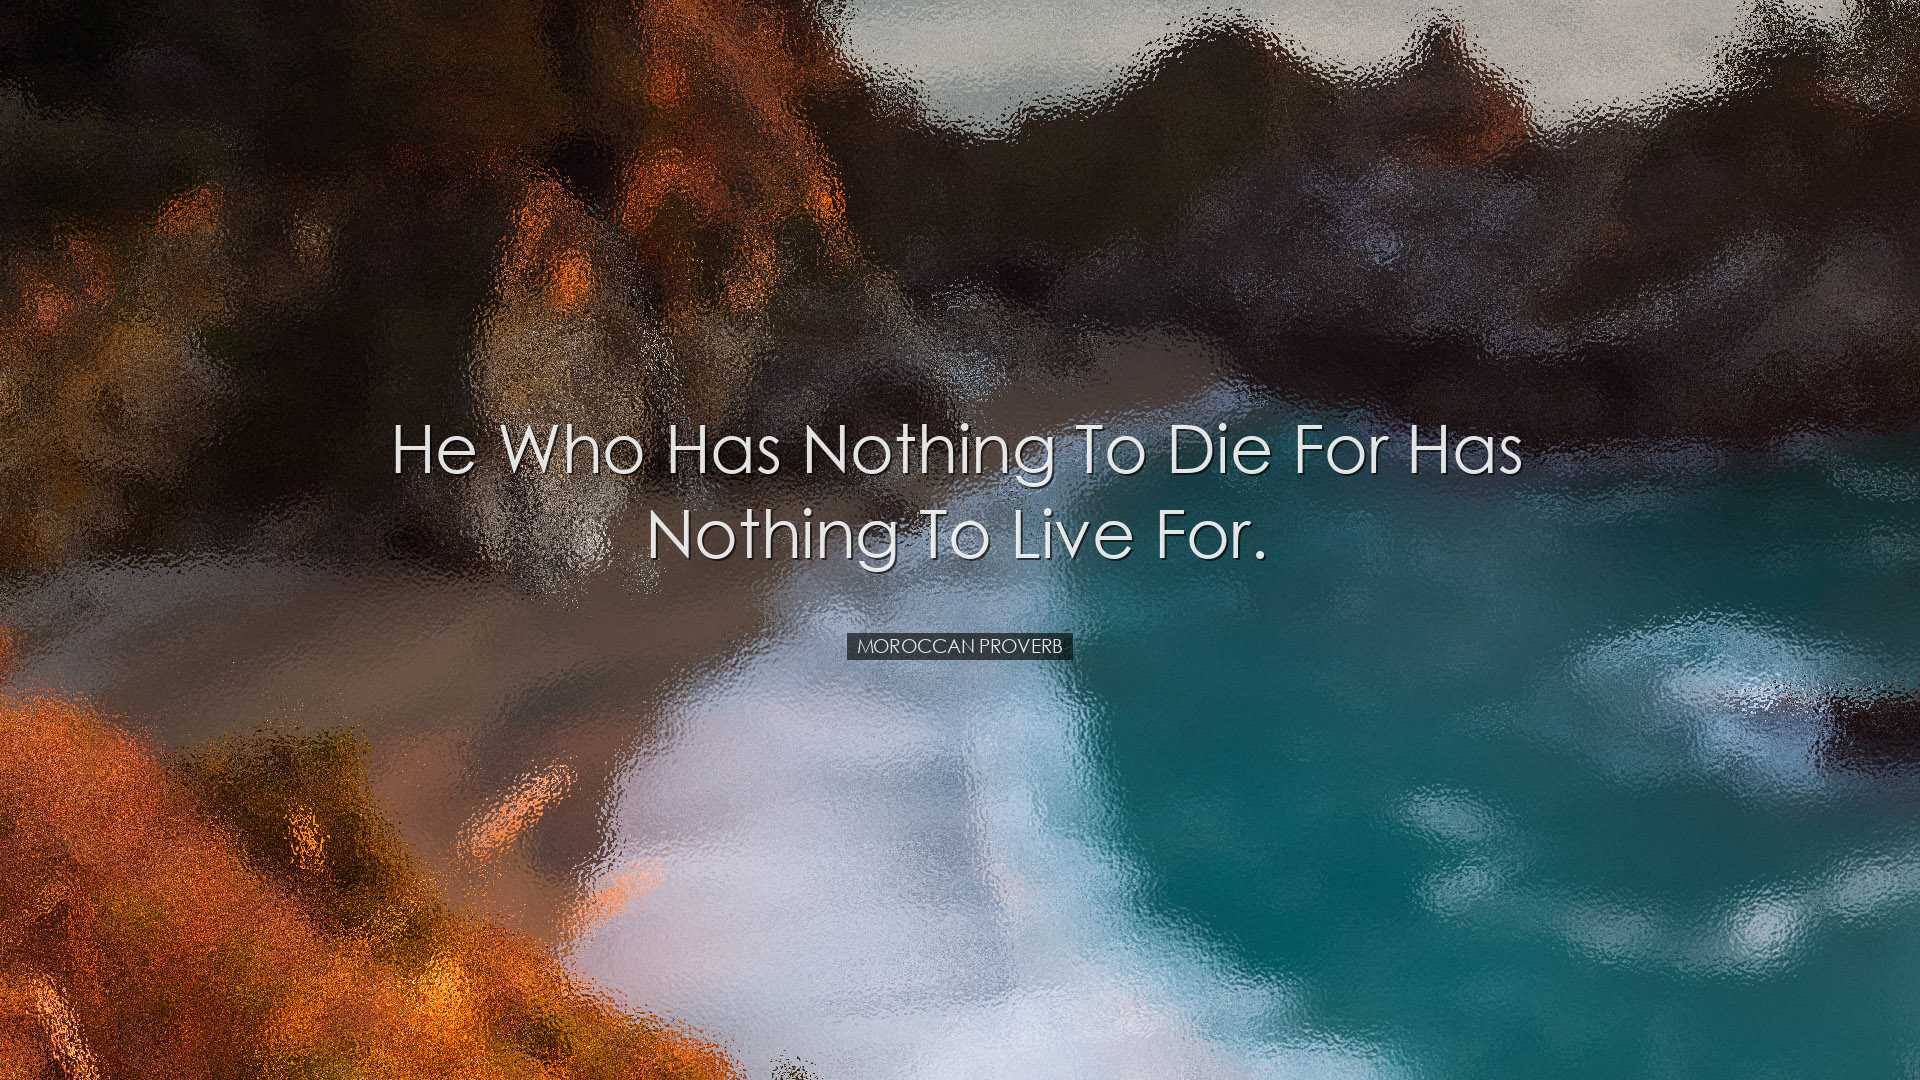 He who has nothing to die for has nothing to live for. - Moroccan